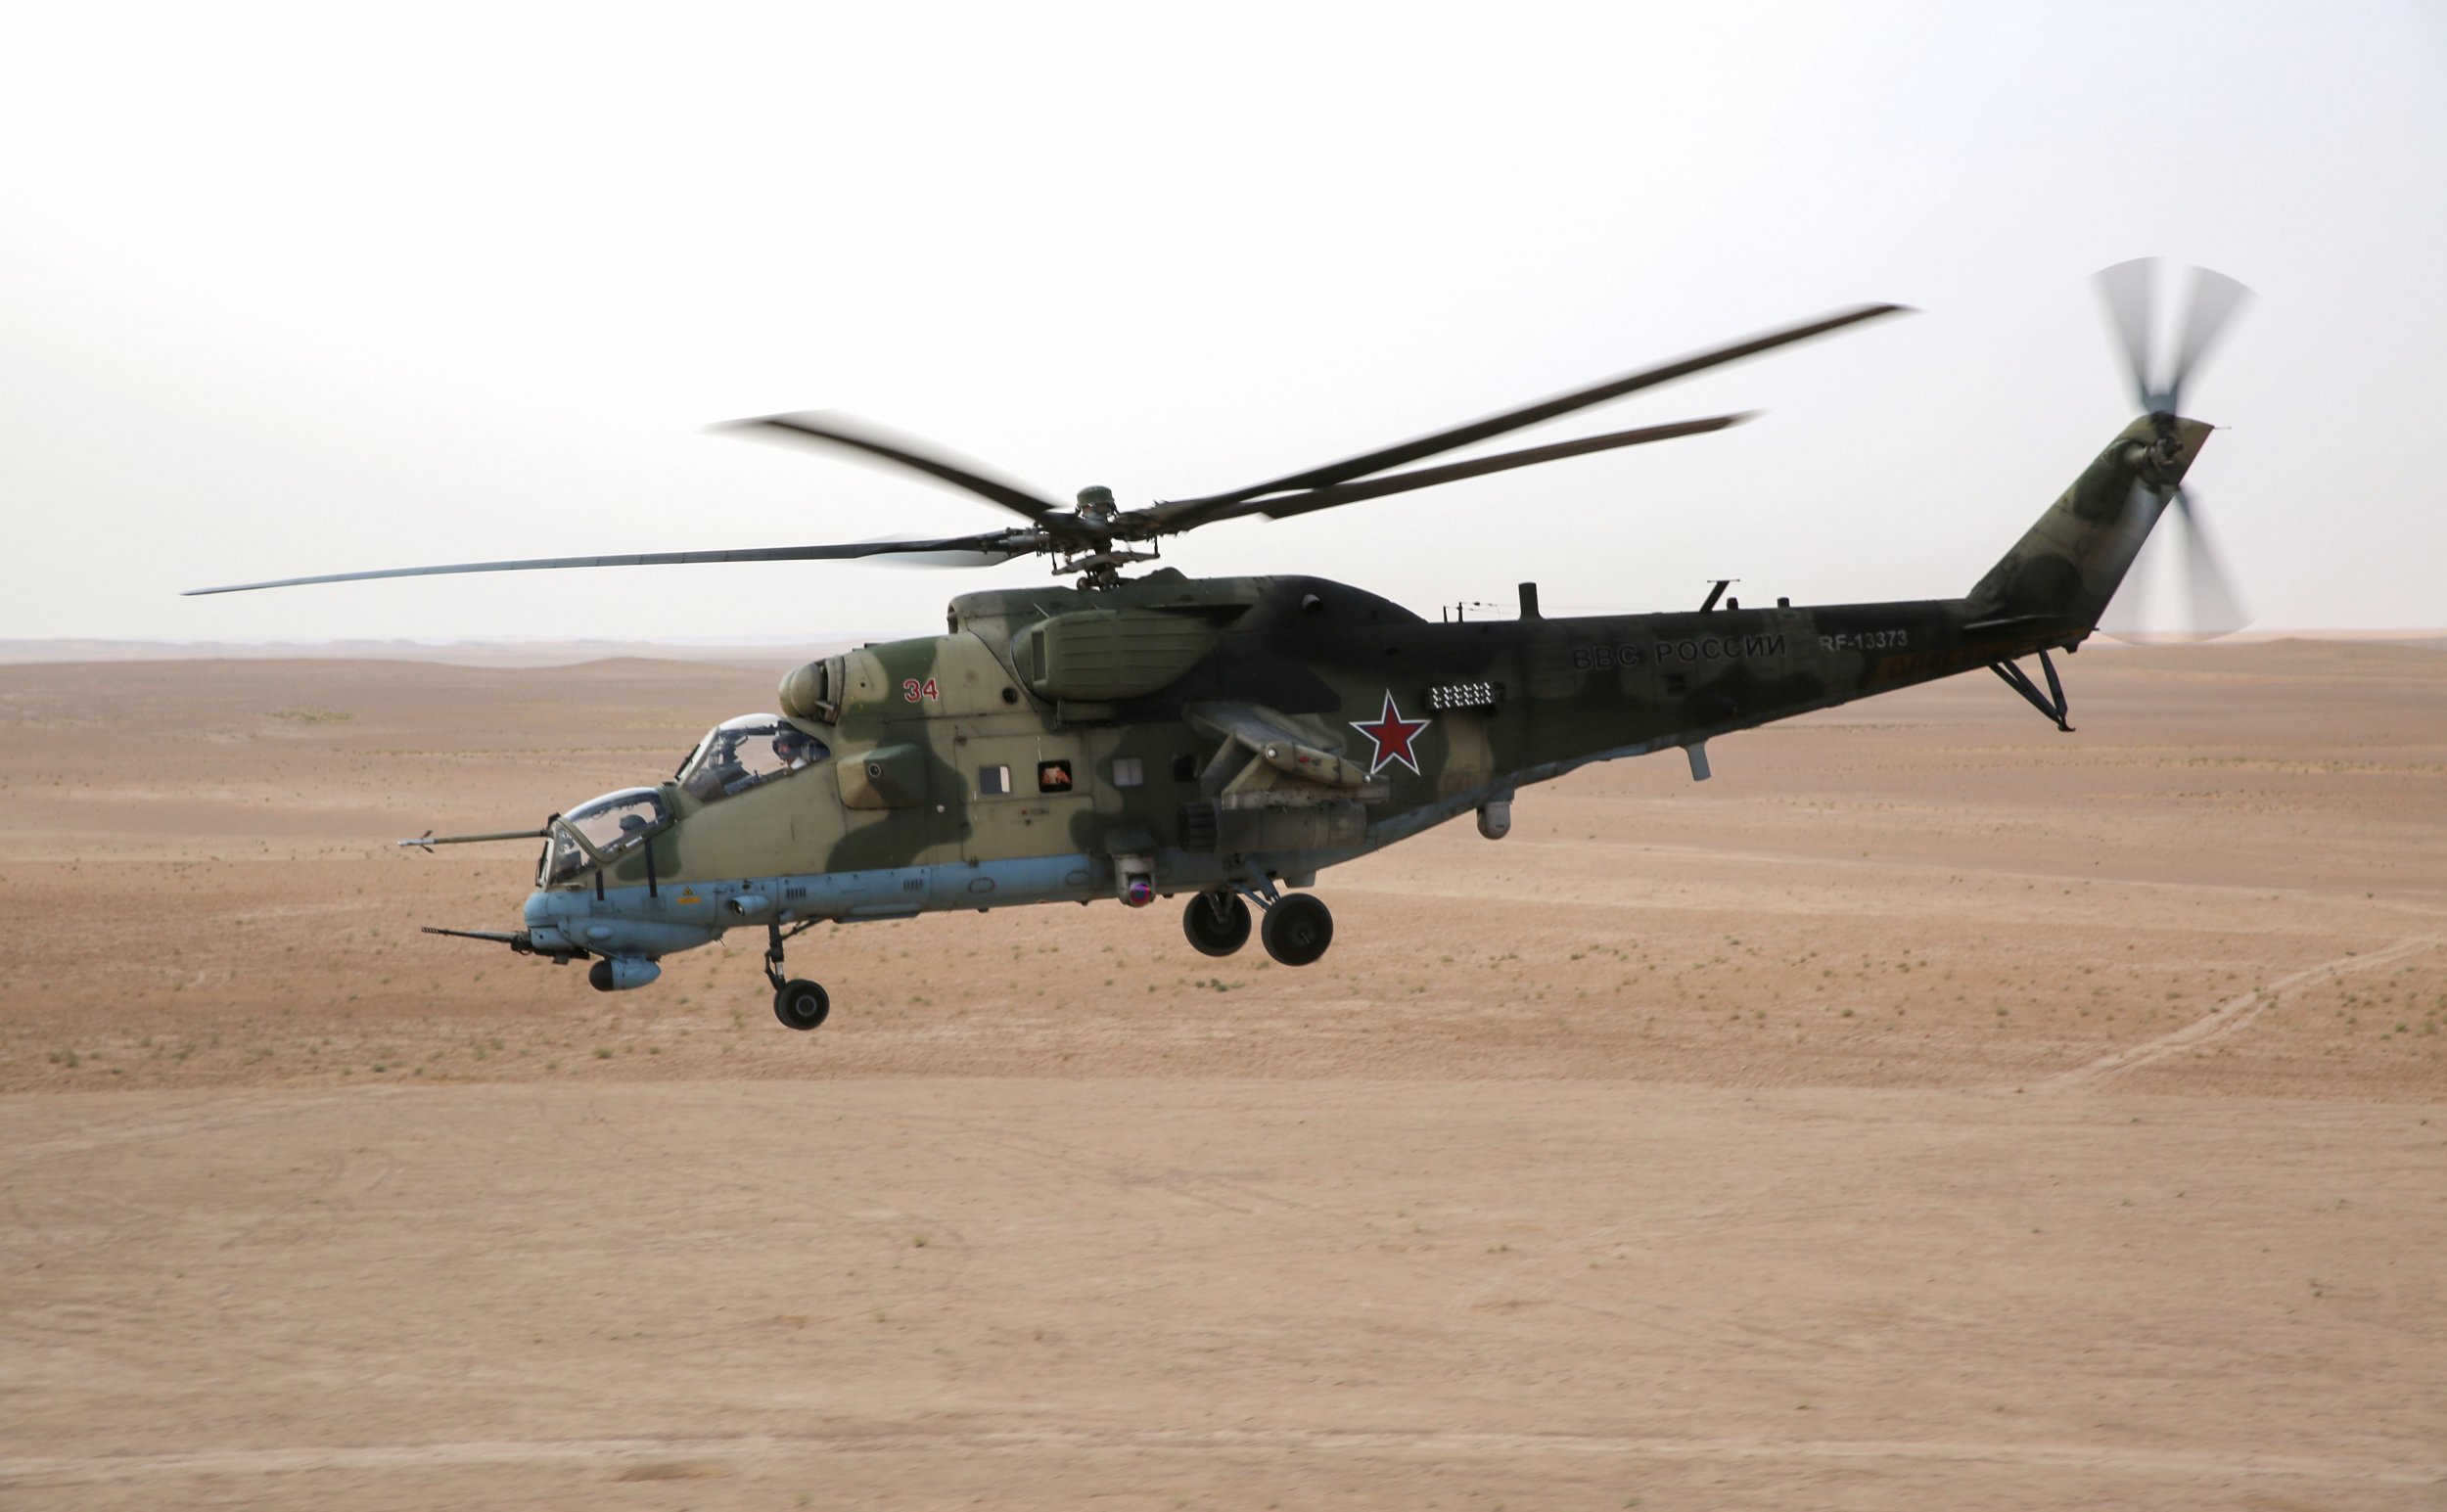 U.S. Marines Want to Buy Russian Helicopters to Practice for Potential War